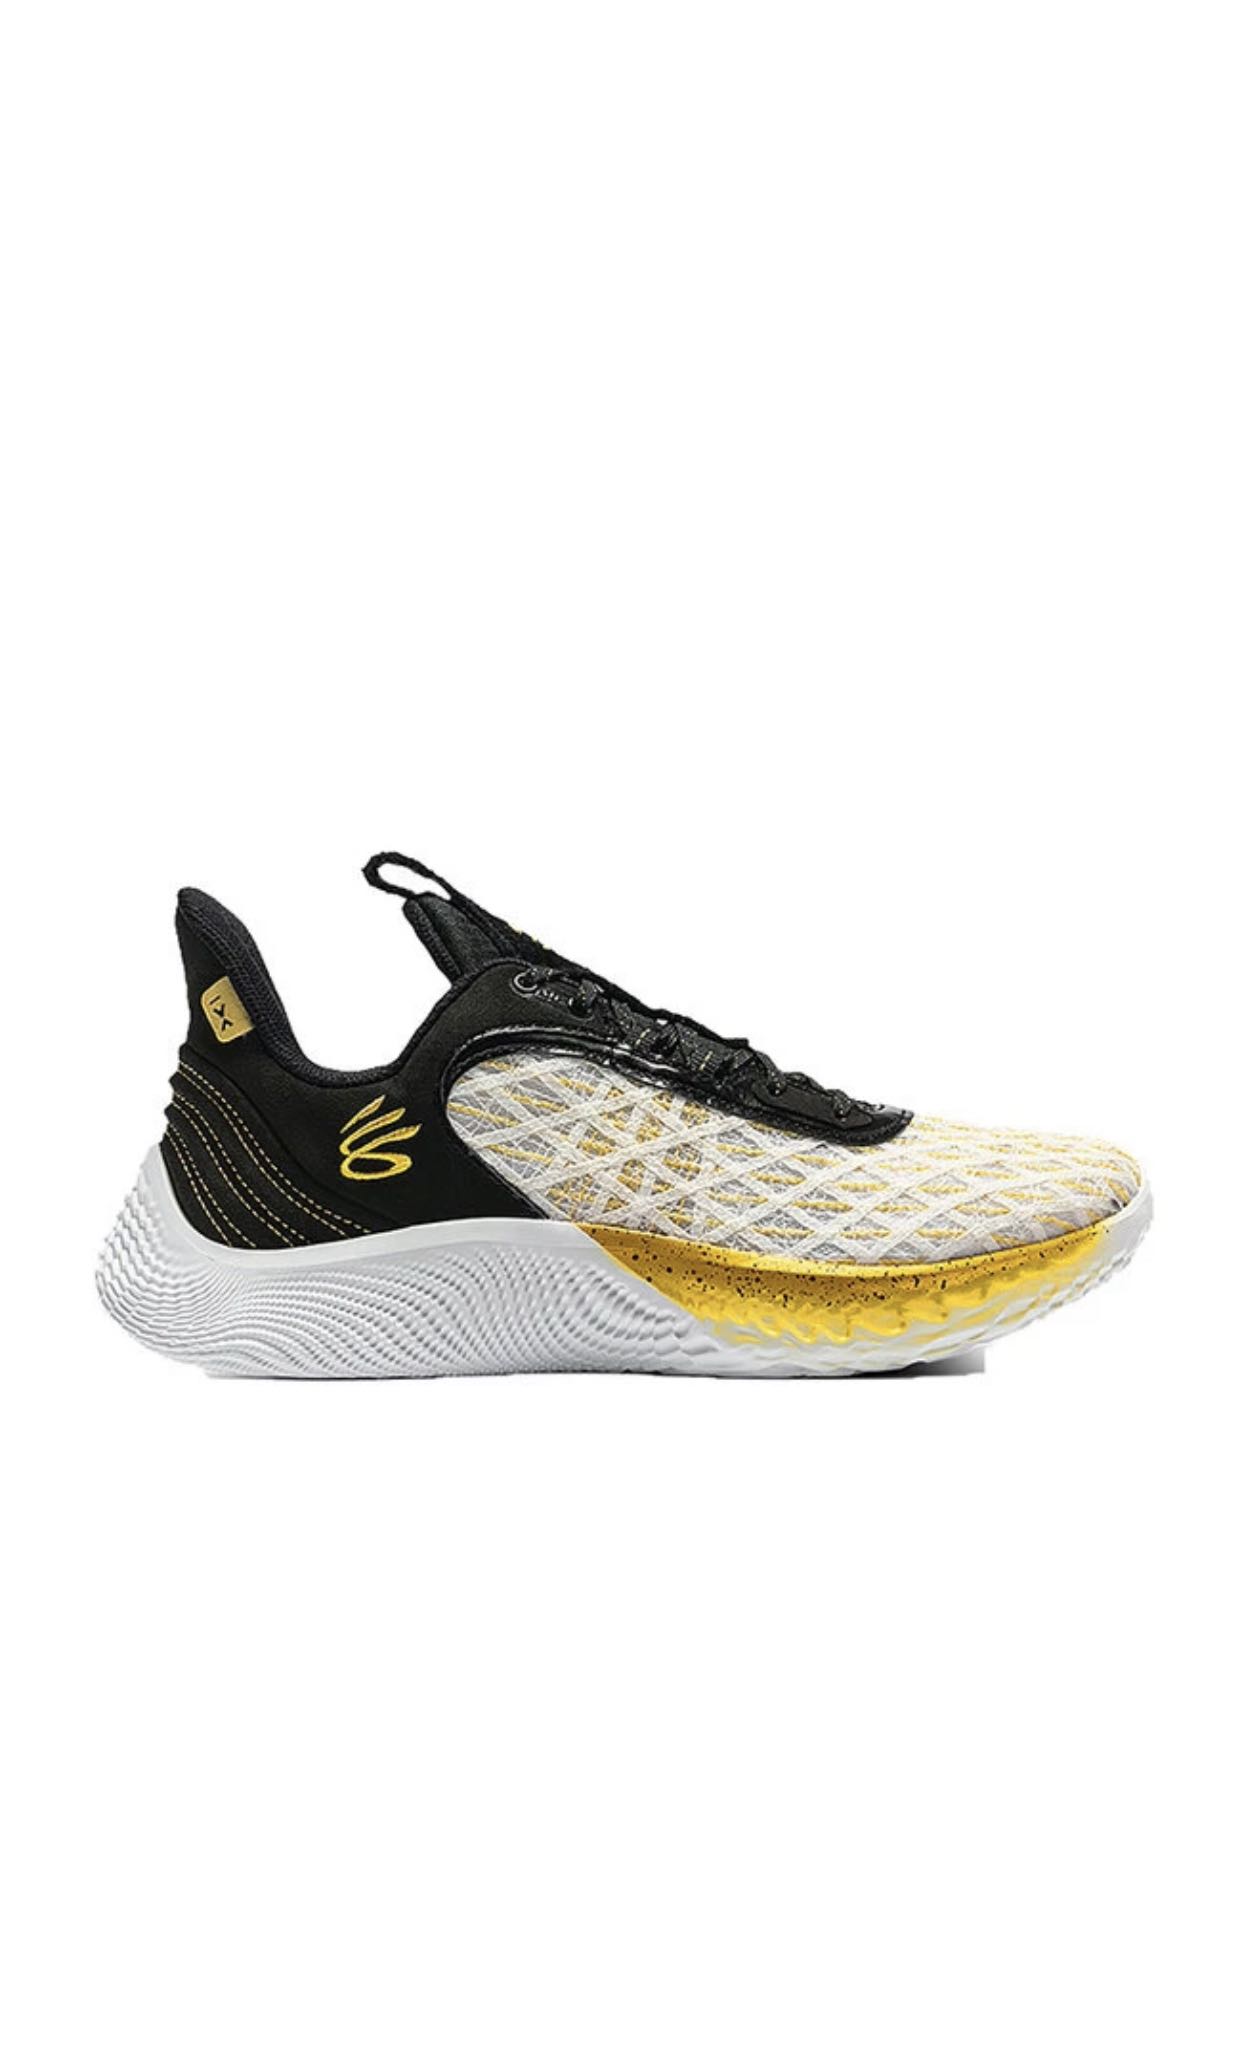 Under Armour UA Curry 9 Curry Flow 9 Basketball Shoes (US7) hot